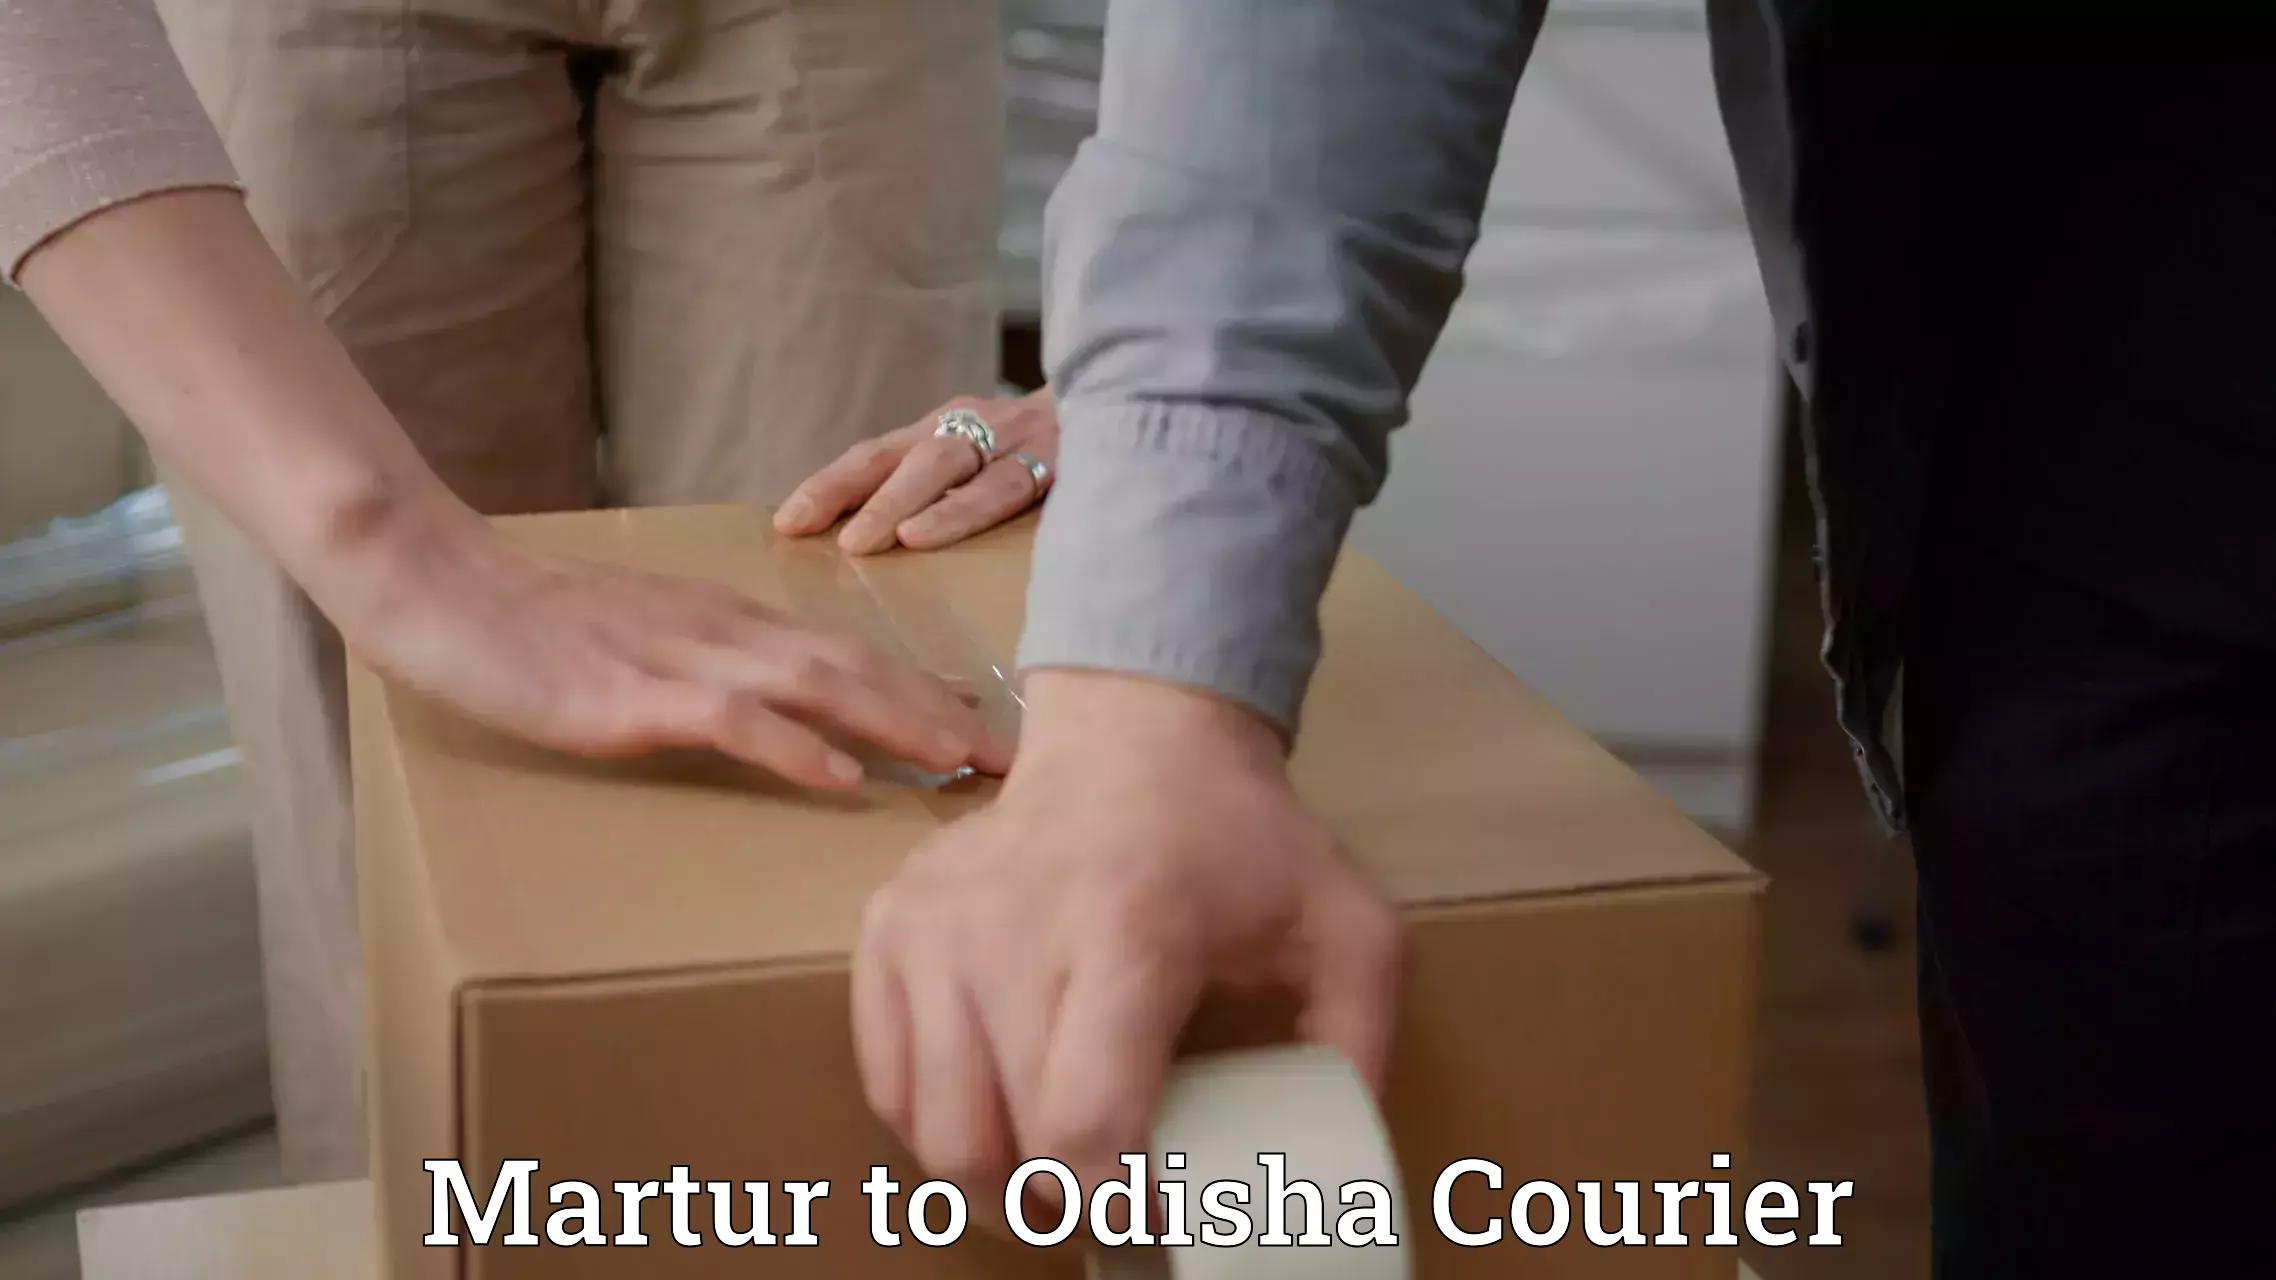 Personal courier services Martur to Bhuban